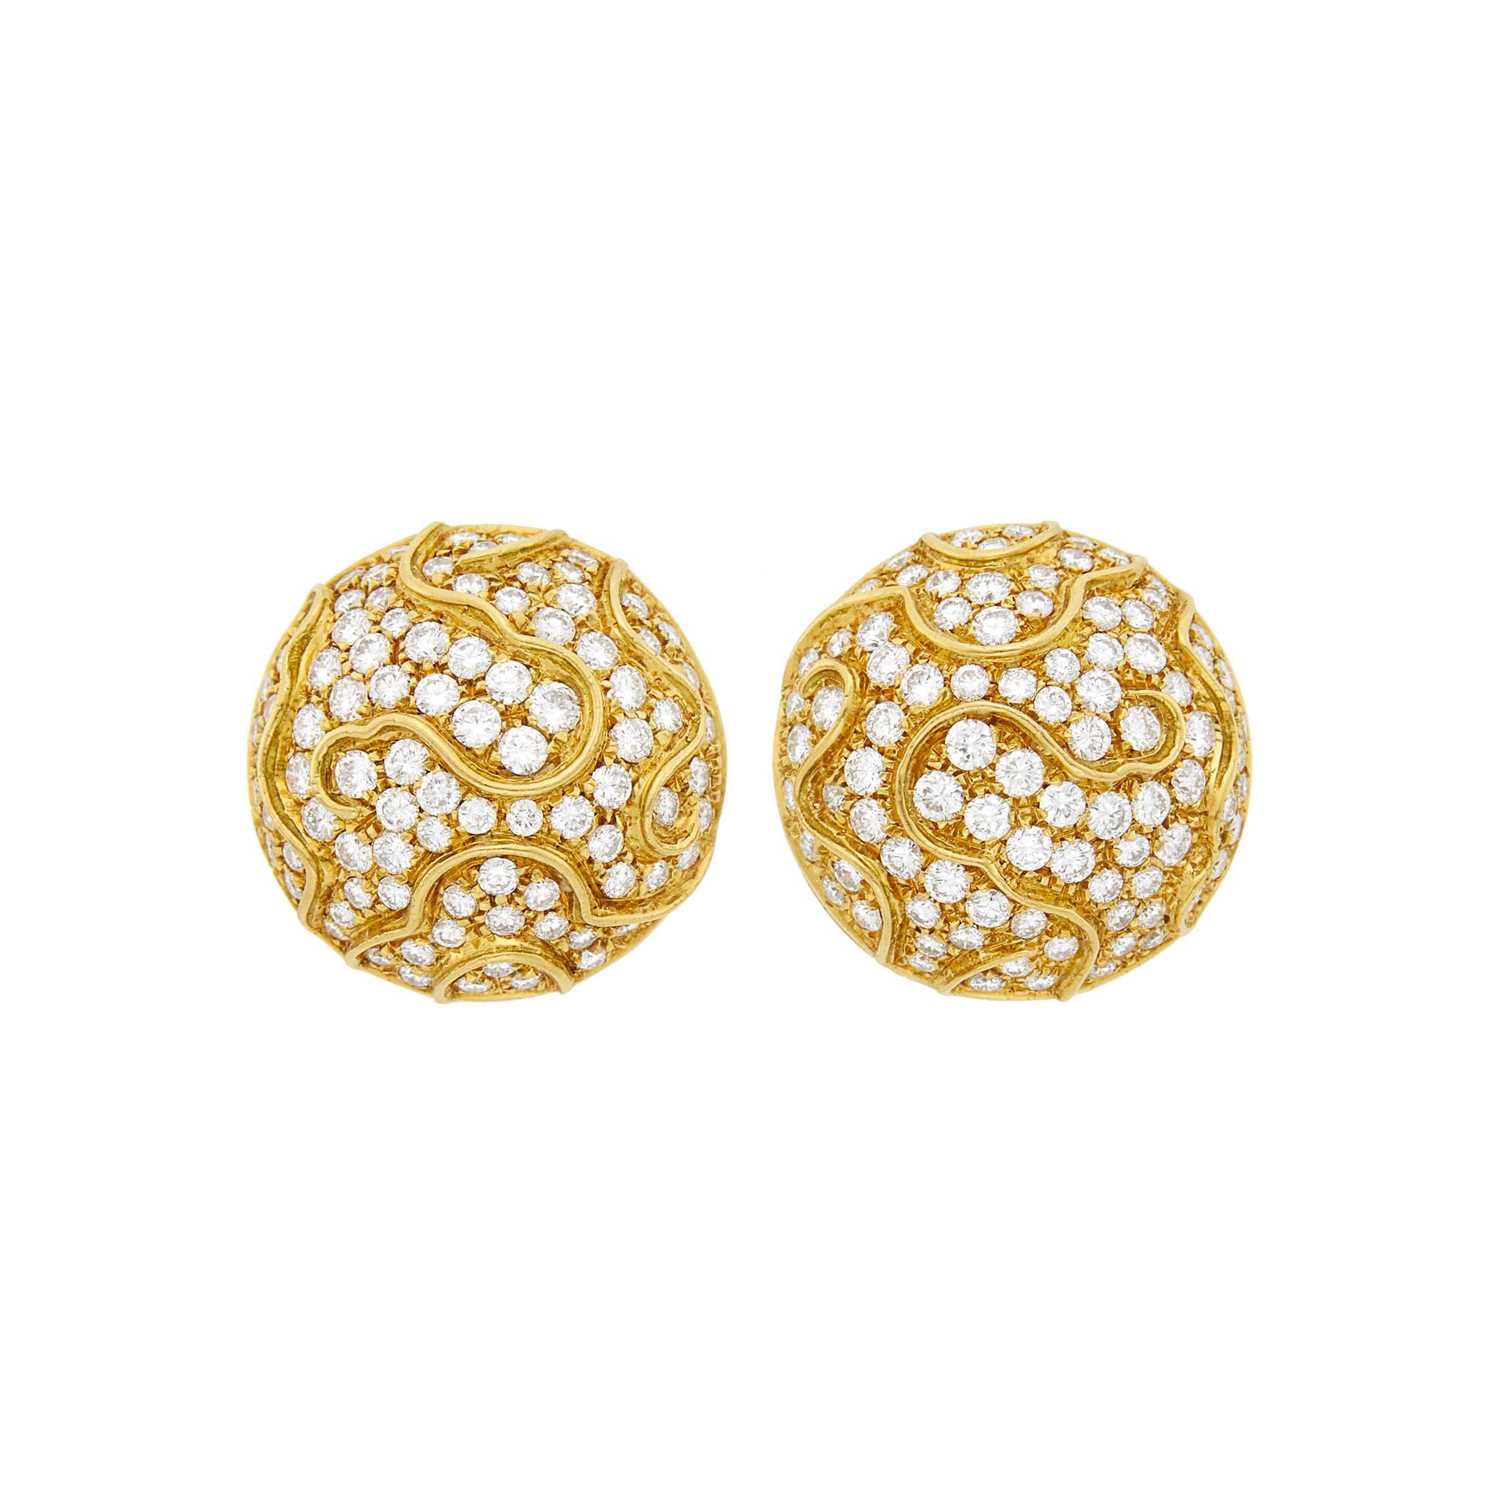 Lot 117 - Pair of Gold and Diamond Bombé Earclips